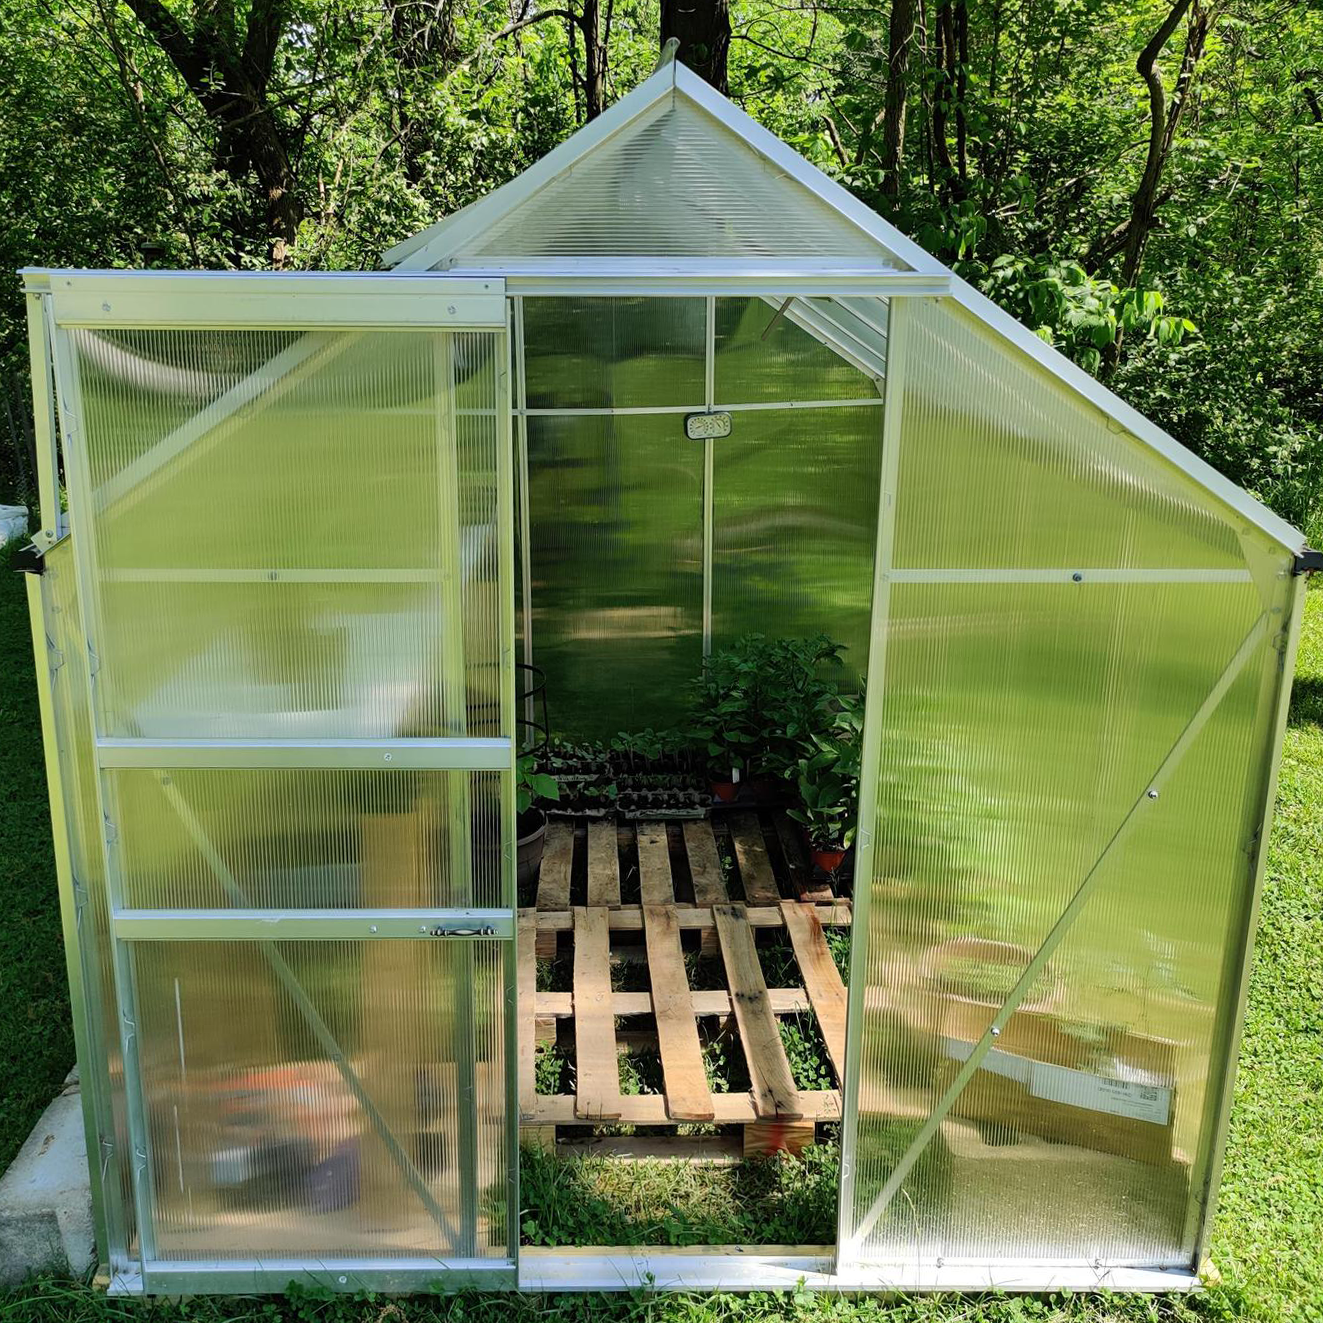 Father's Day Sale-Harborfreight-10 ft. x 12 ft. Greenhouse with 4 Vents